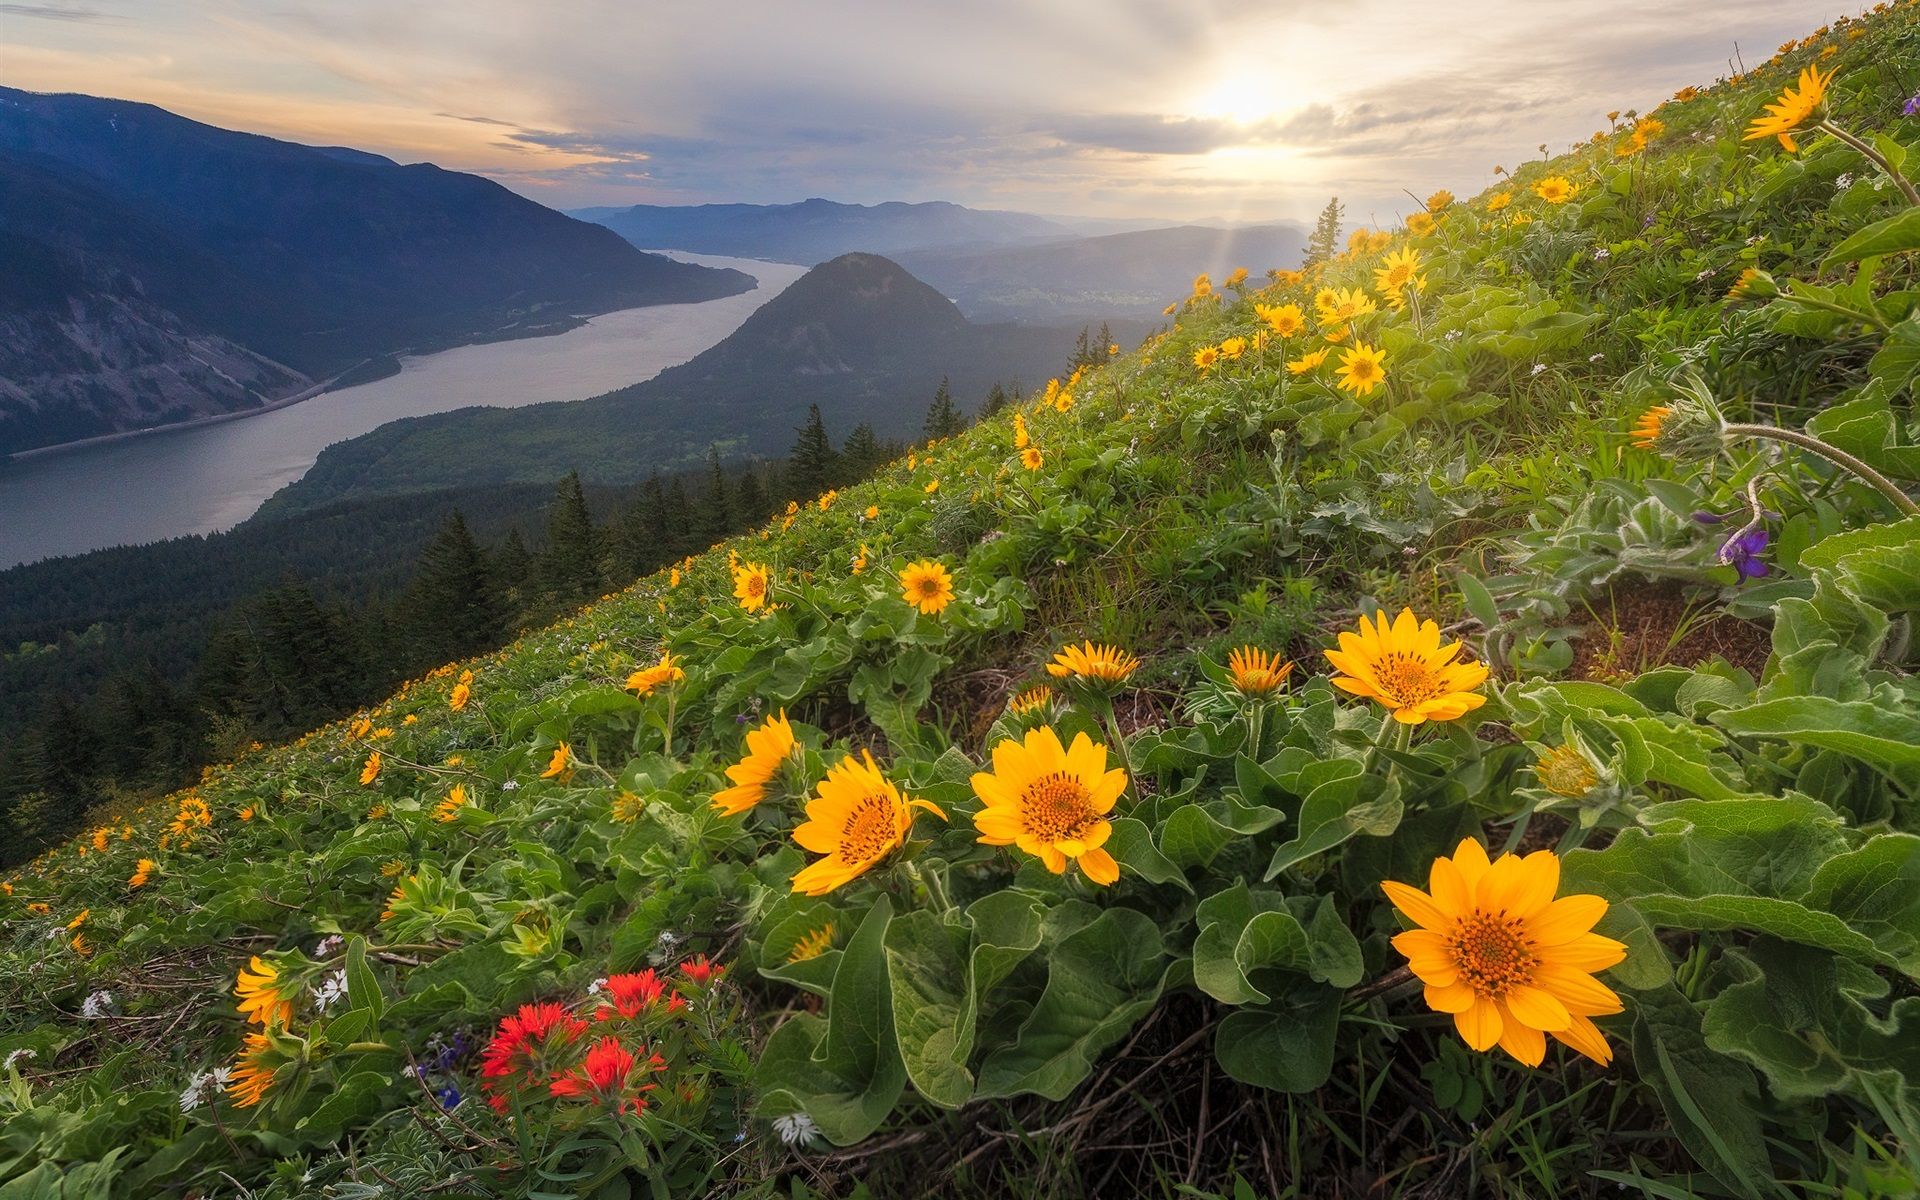 Wallpaper Dog Mountain, Yellow Flowers, Slope, Cascade Range With River And Flowers